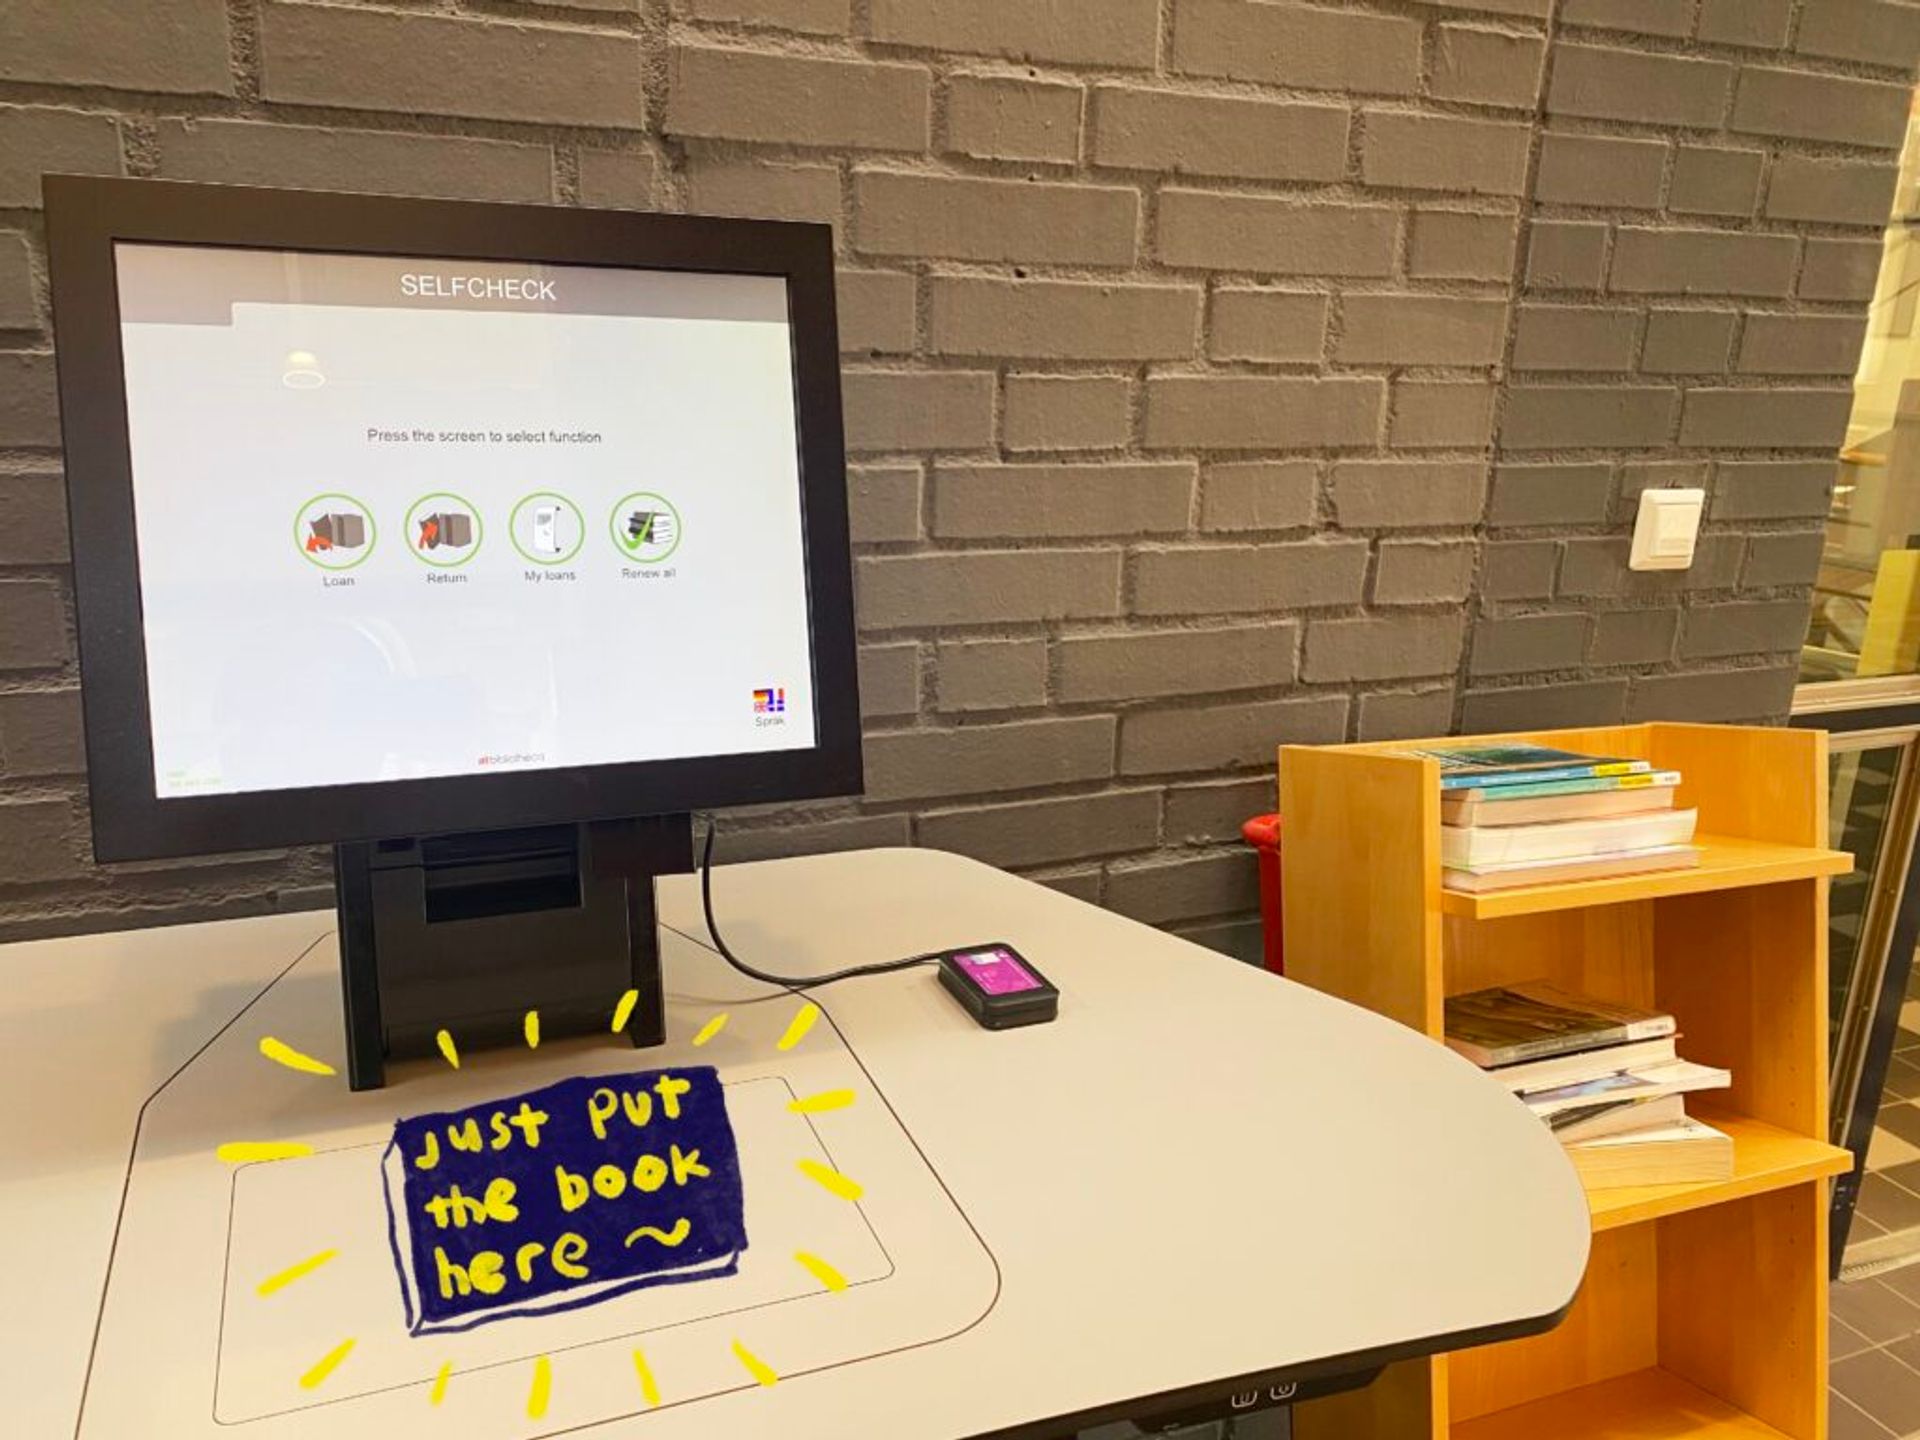 A self-service station for borrowing books located in Jönköping University's library.